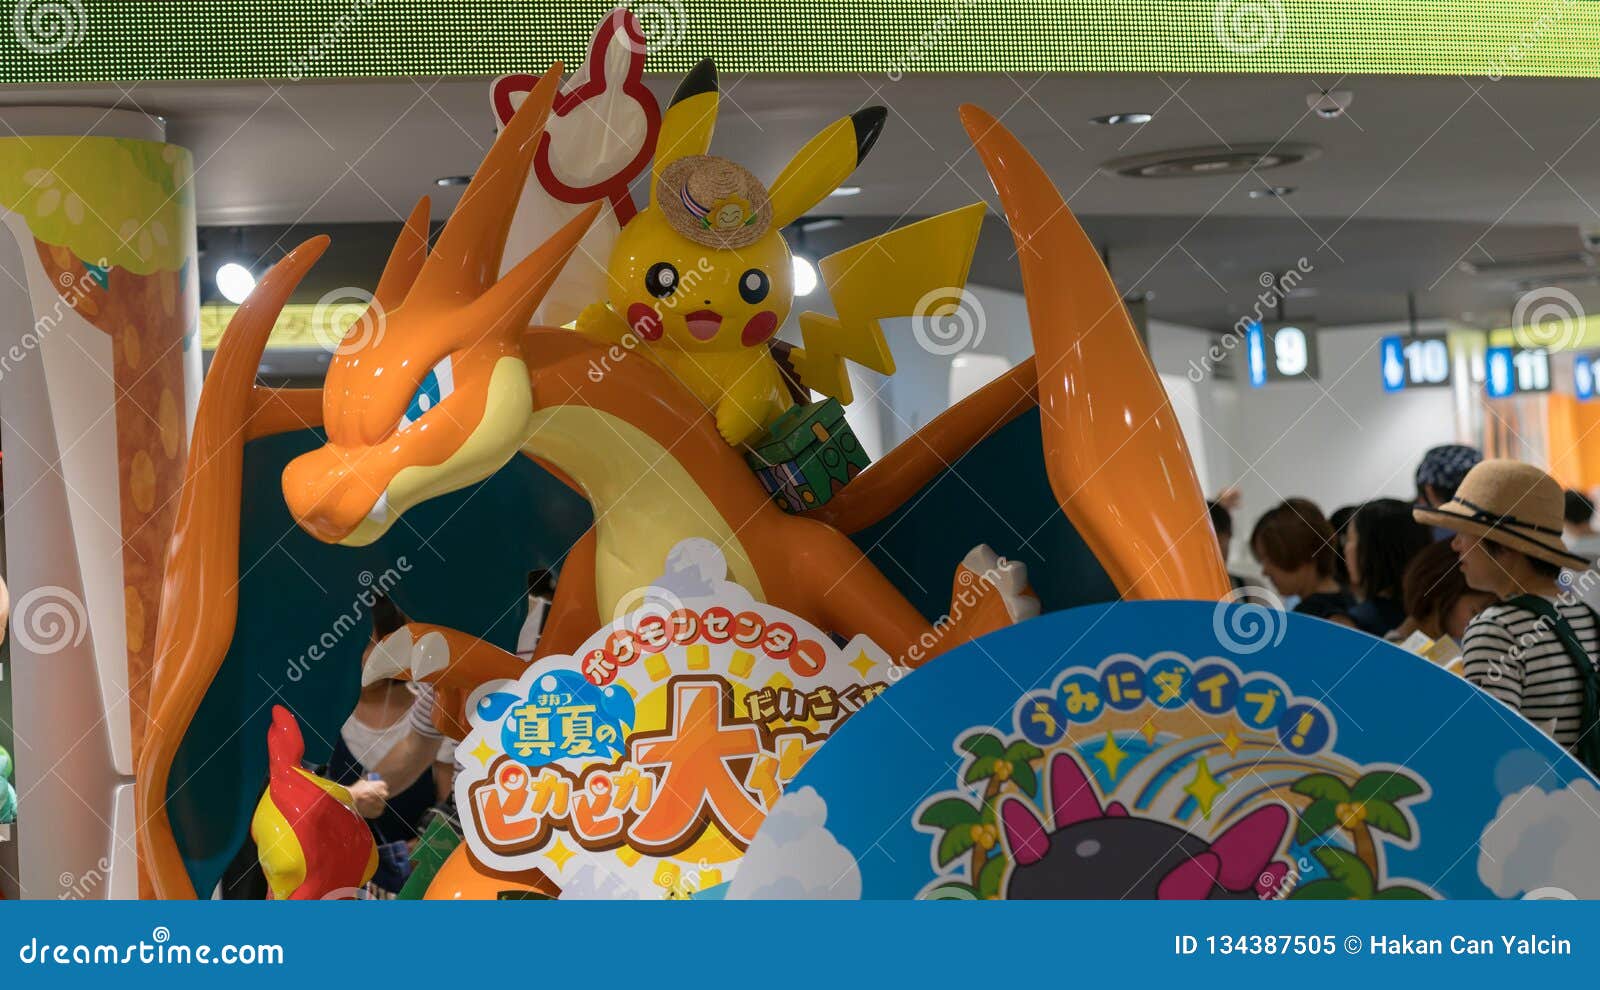 Pokemon Figure At The Entrance Of The Pokemon Center Store In Sunshine City Shopping Mall In Tokyo Japan Editorial Image Image Of Square Popular